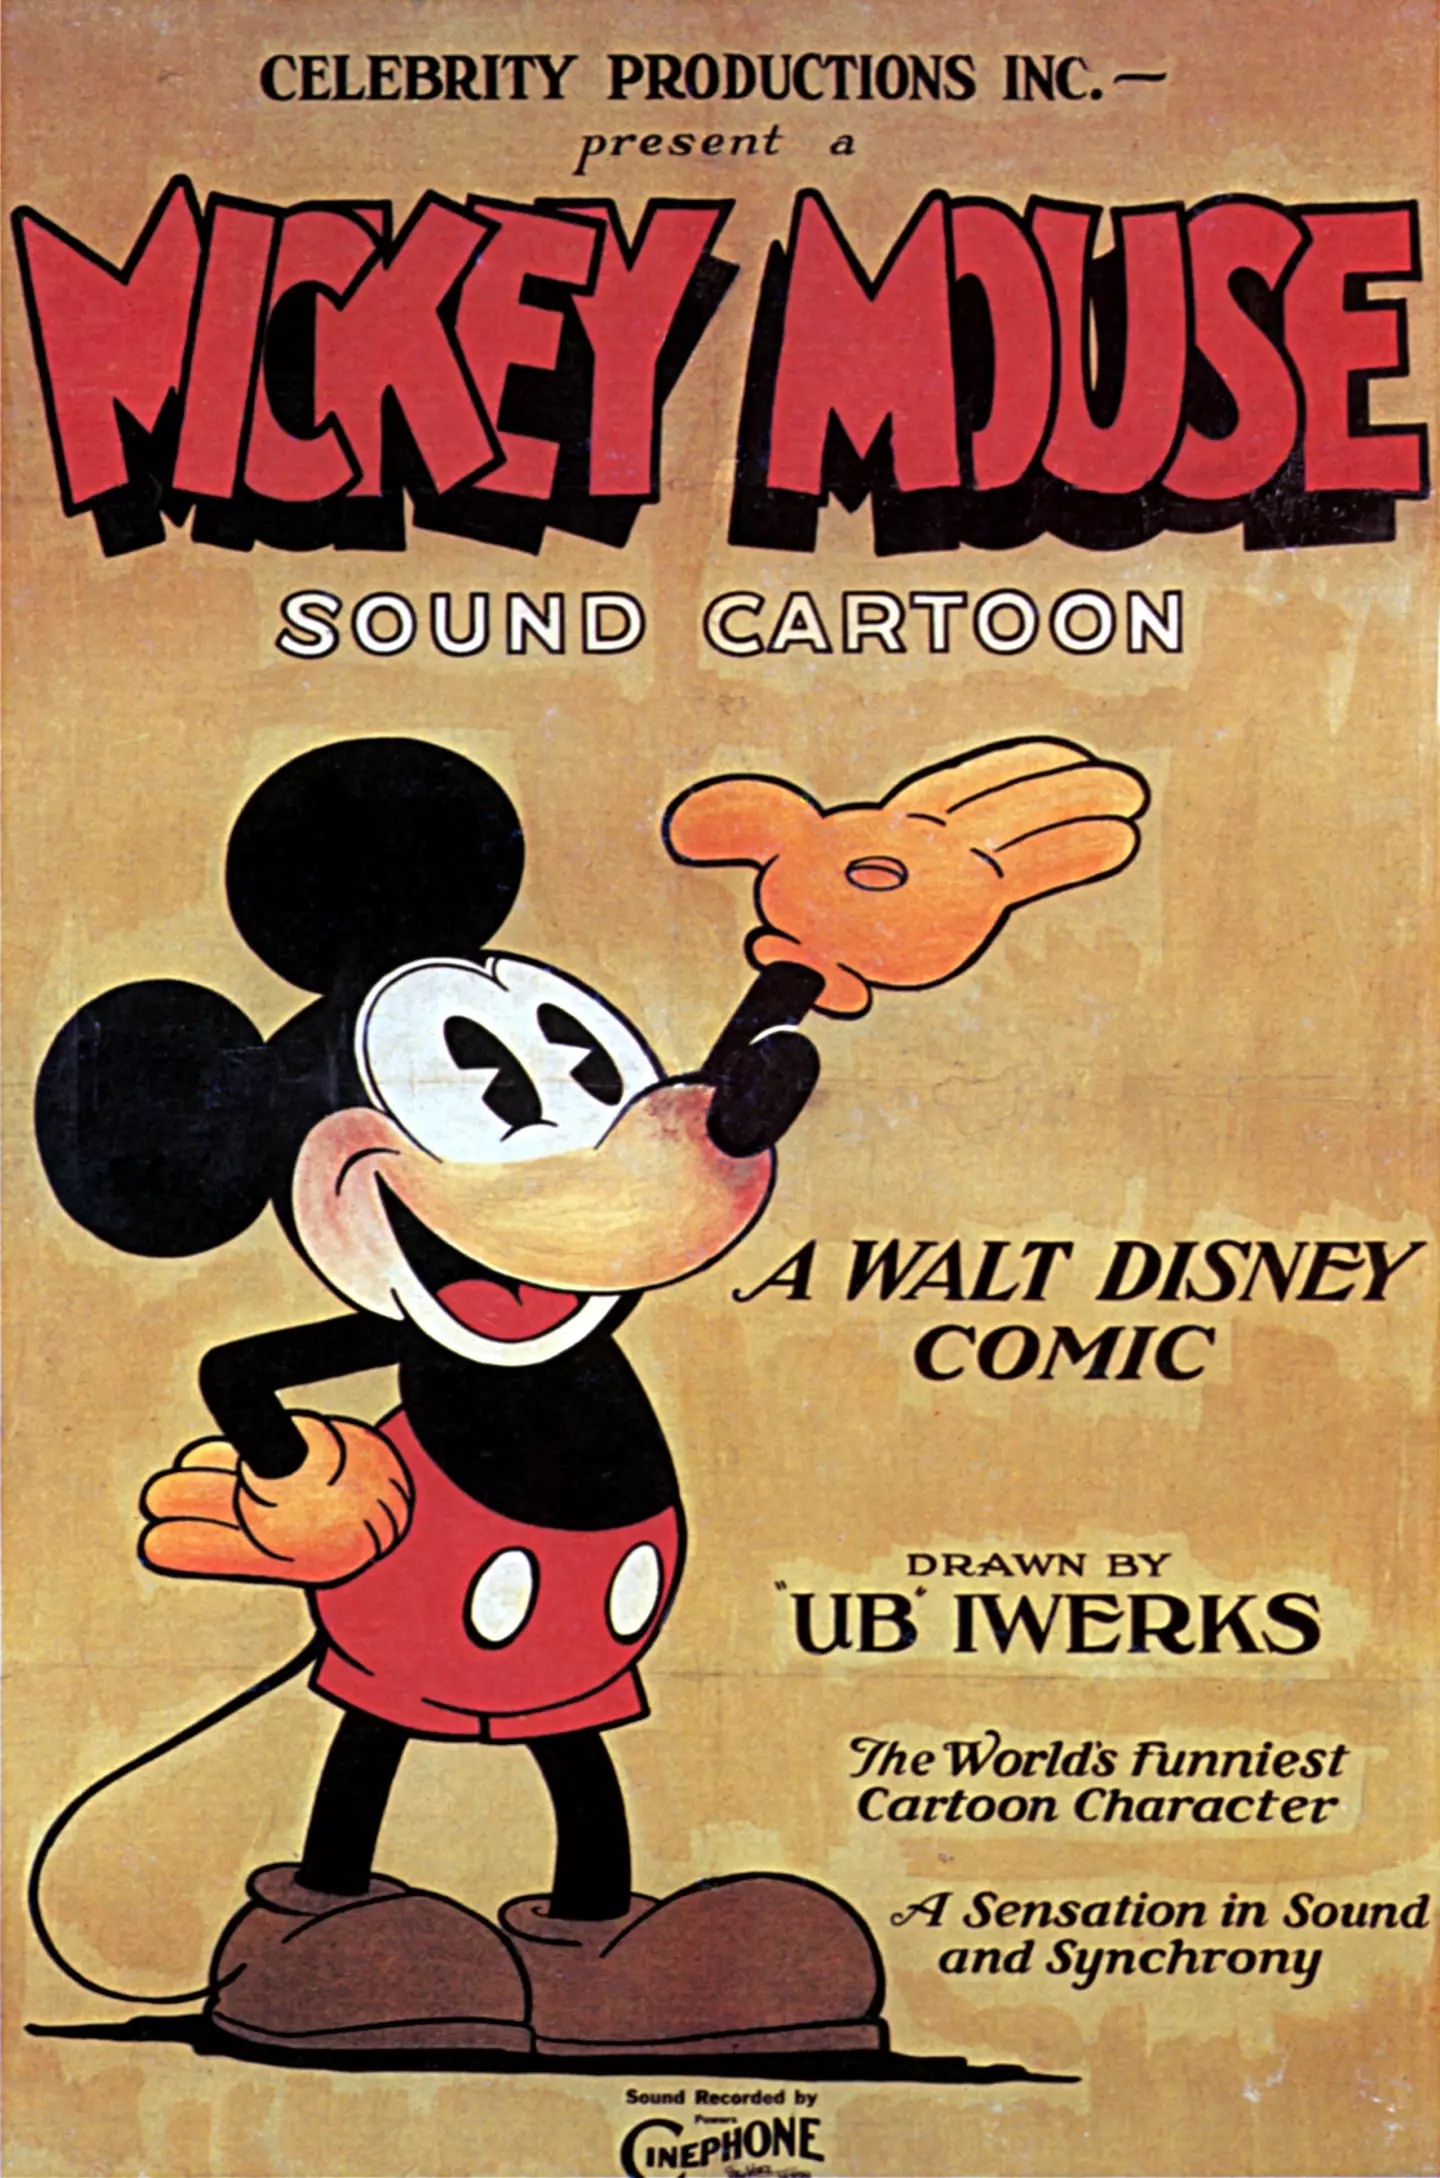 Mickey Mouse was created back in 1928.